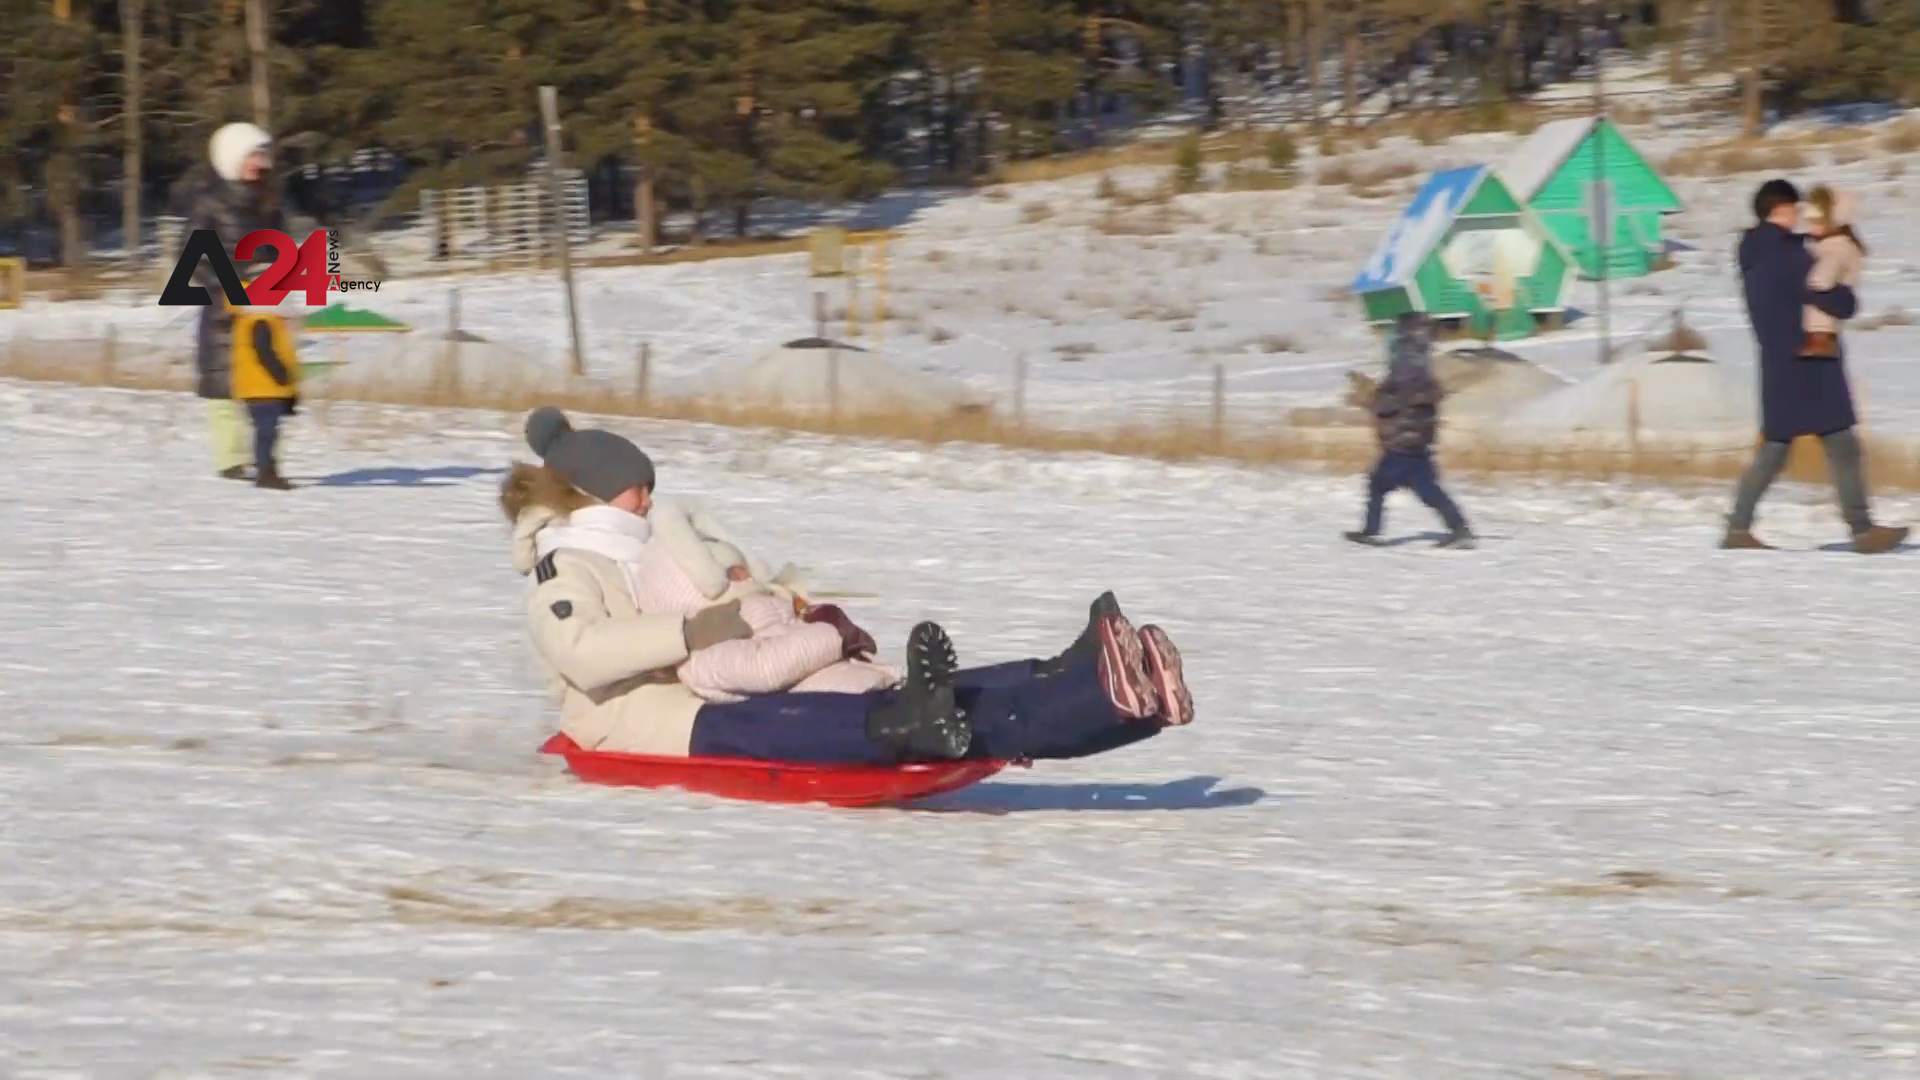 Mongolia – Poor quality imported sleds pose risk for children, as injury incidents increase